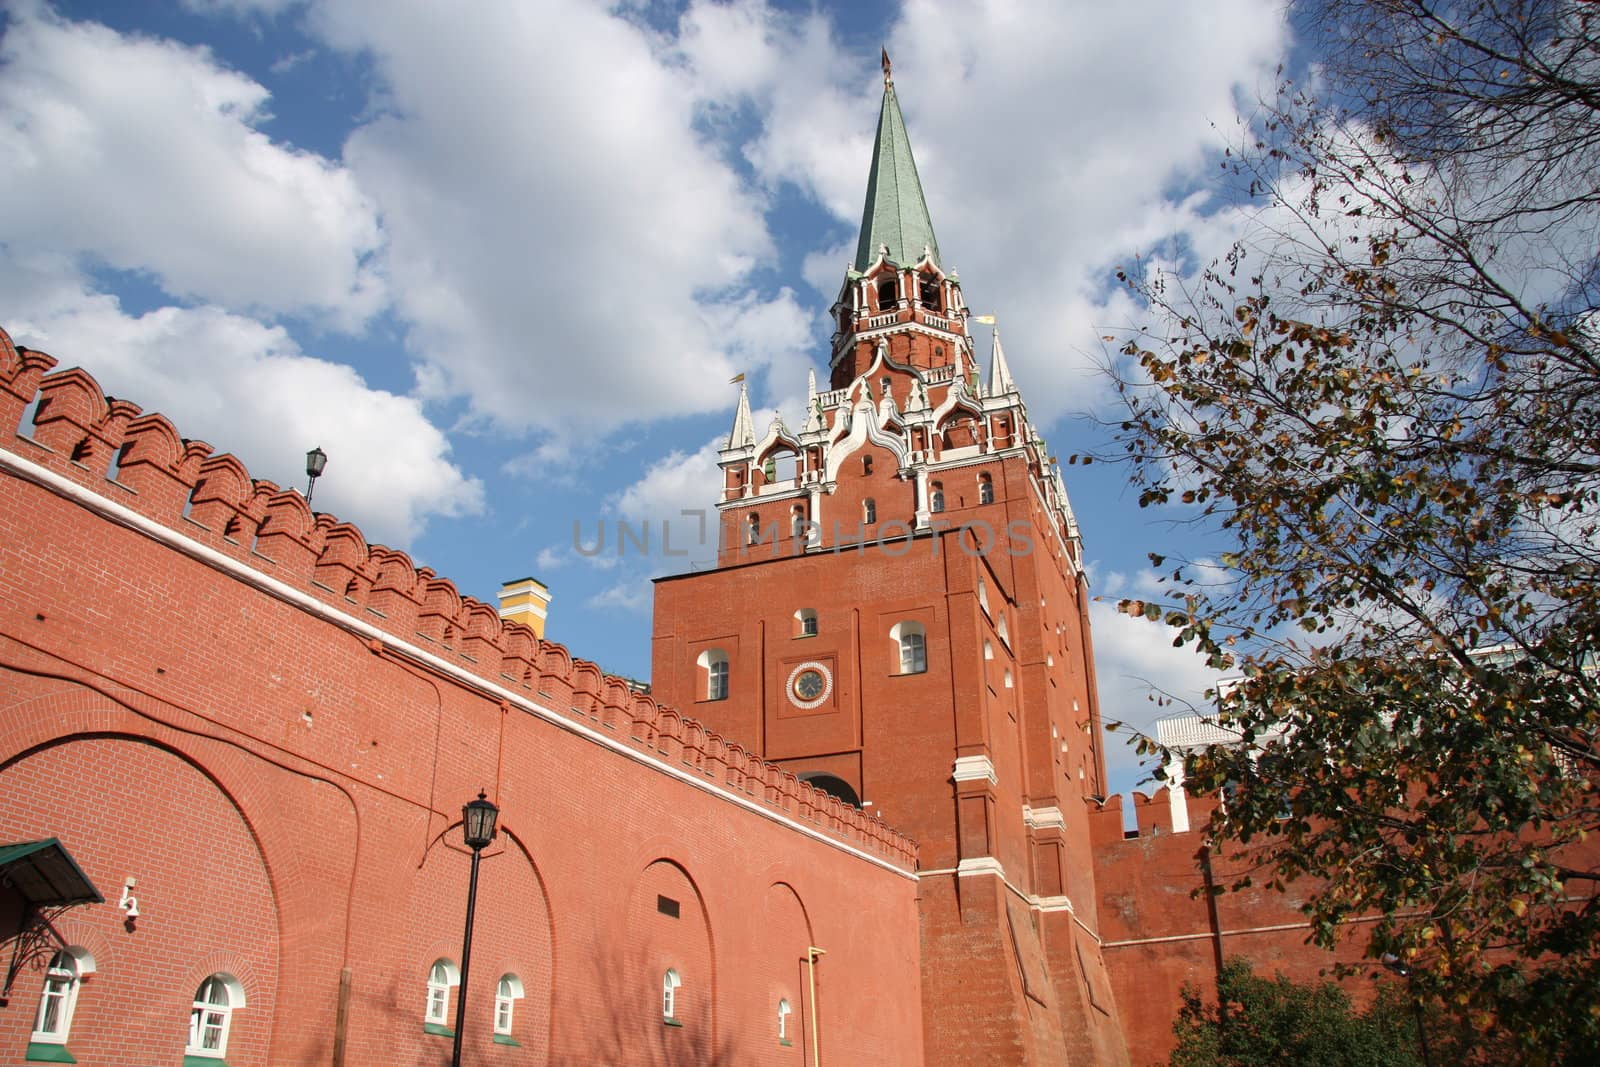 Moscow Kremlin wall and the Troitskaya tower over blue cloudy sky, Moscow, Russia